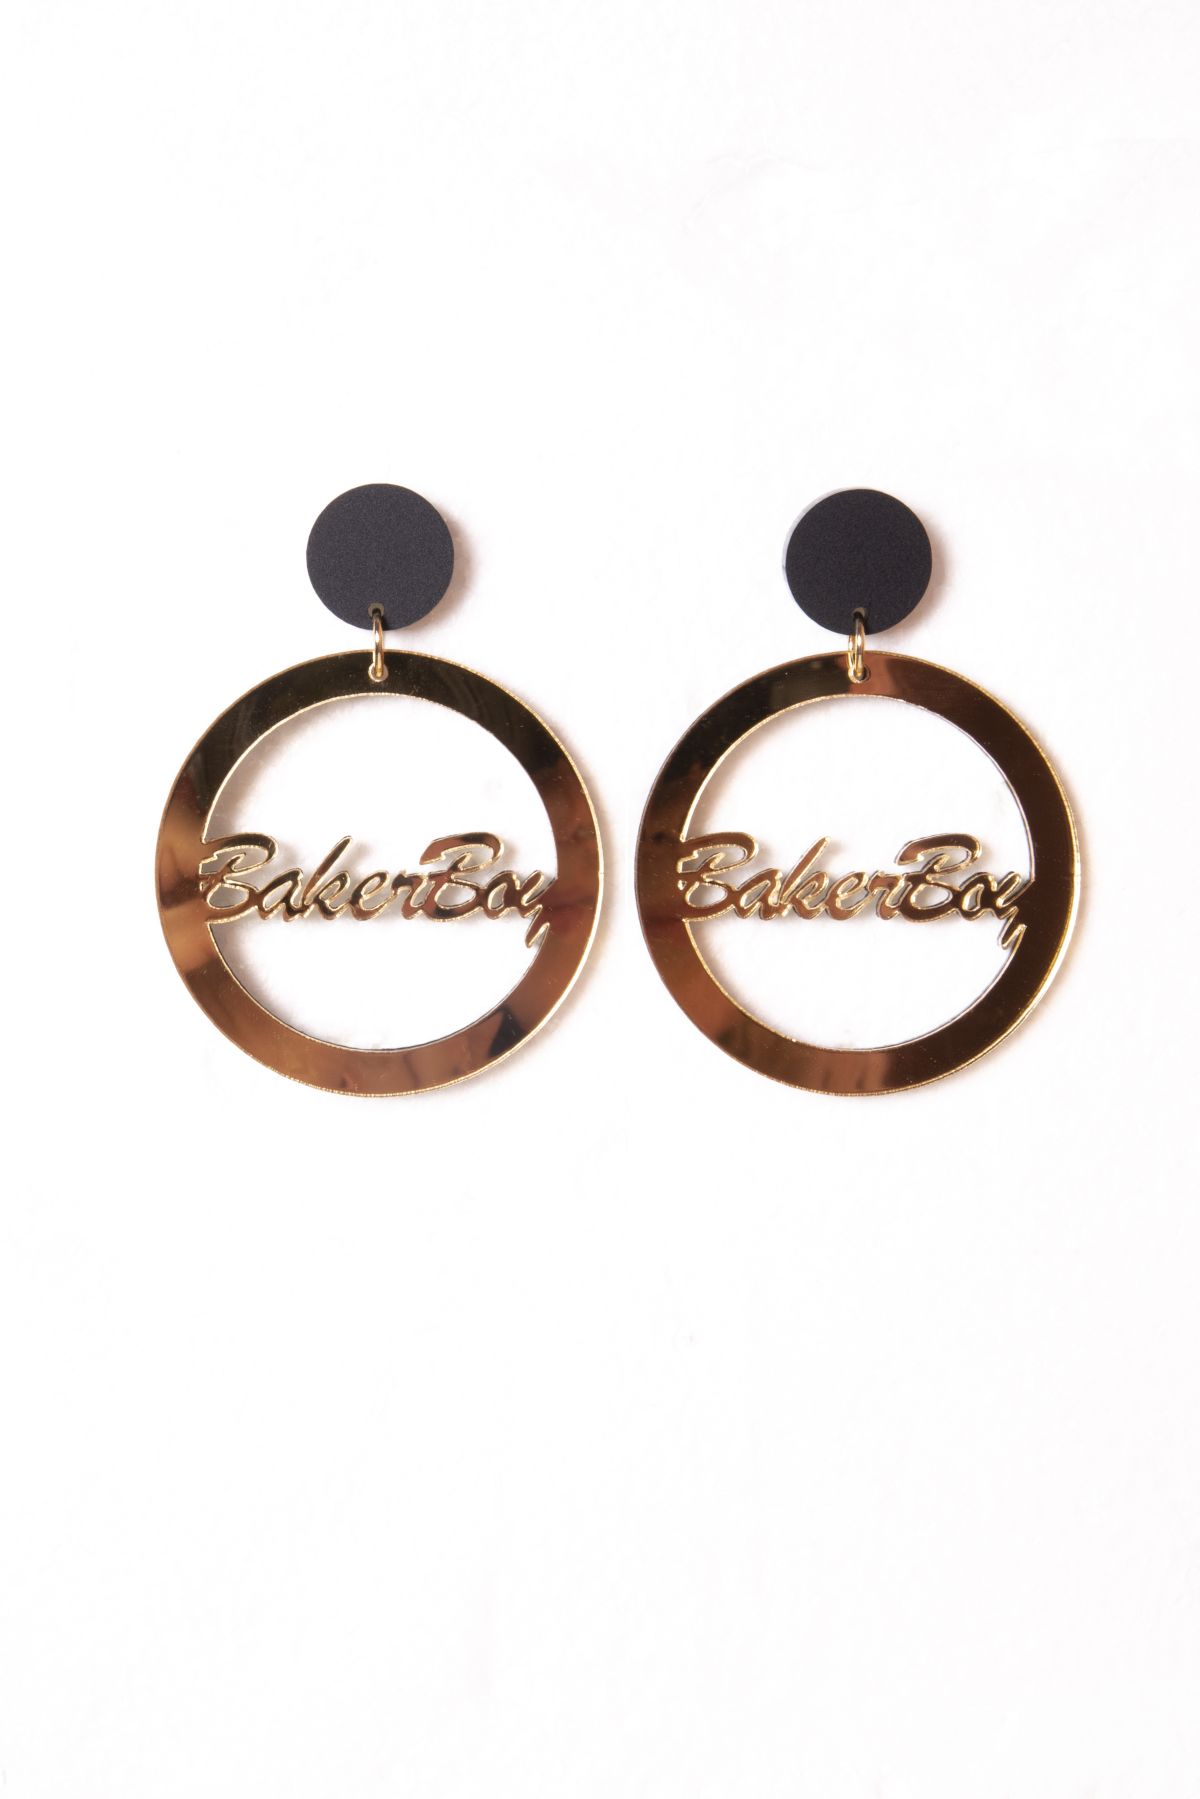 Buy Sarah Om Gold Color Steel Round Stud Earring for Boys at Amazon.in